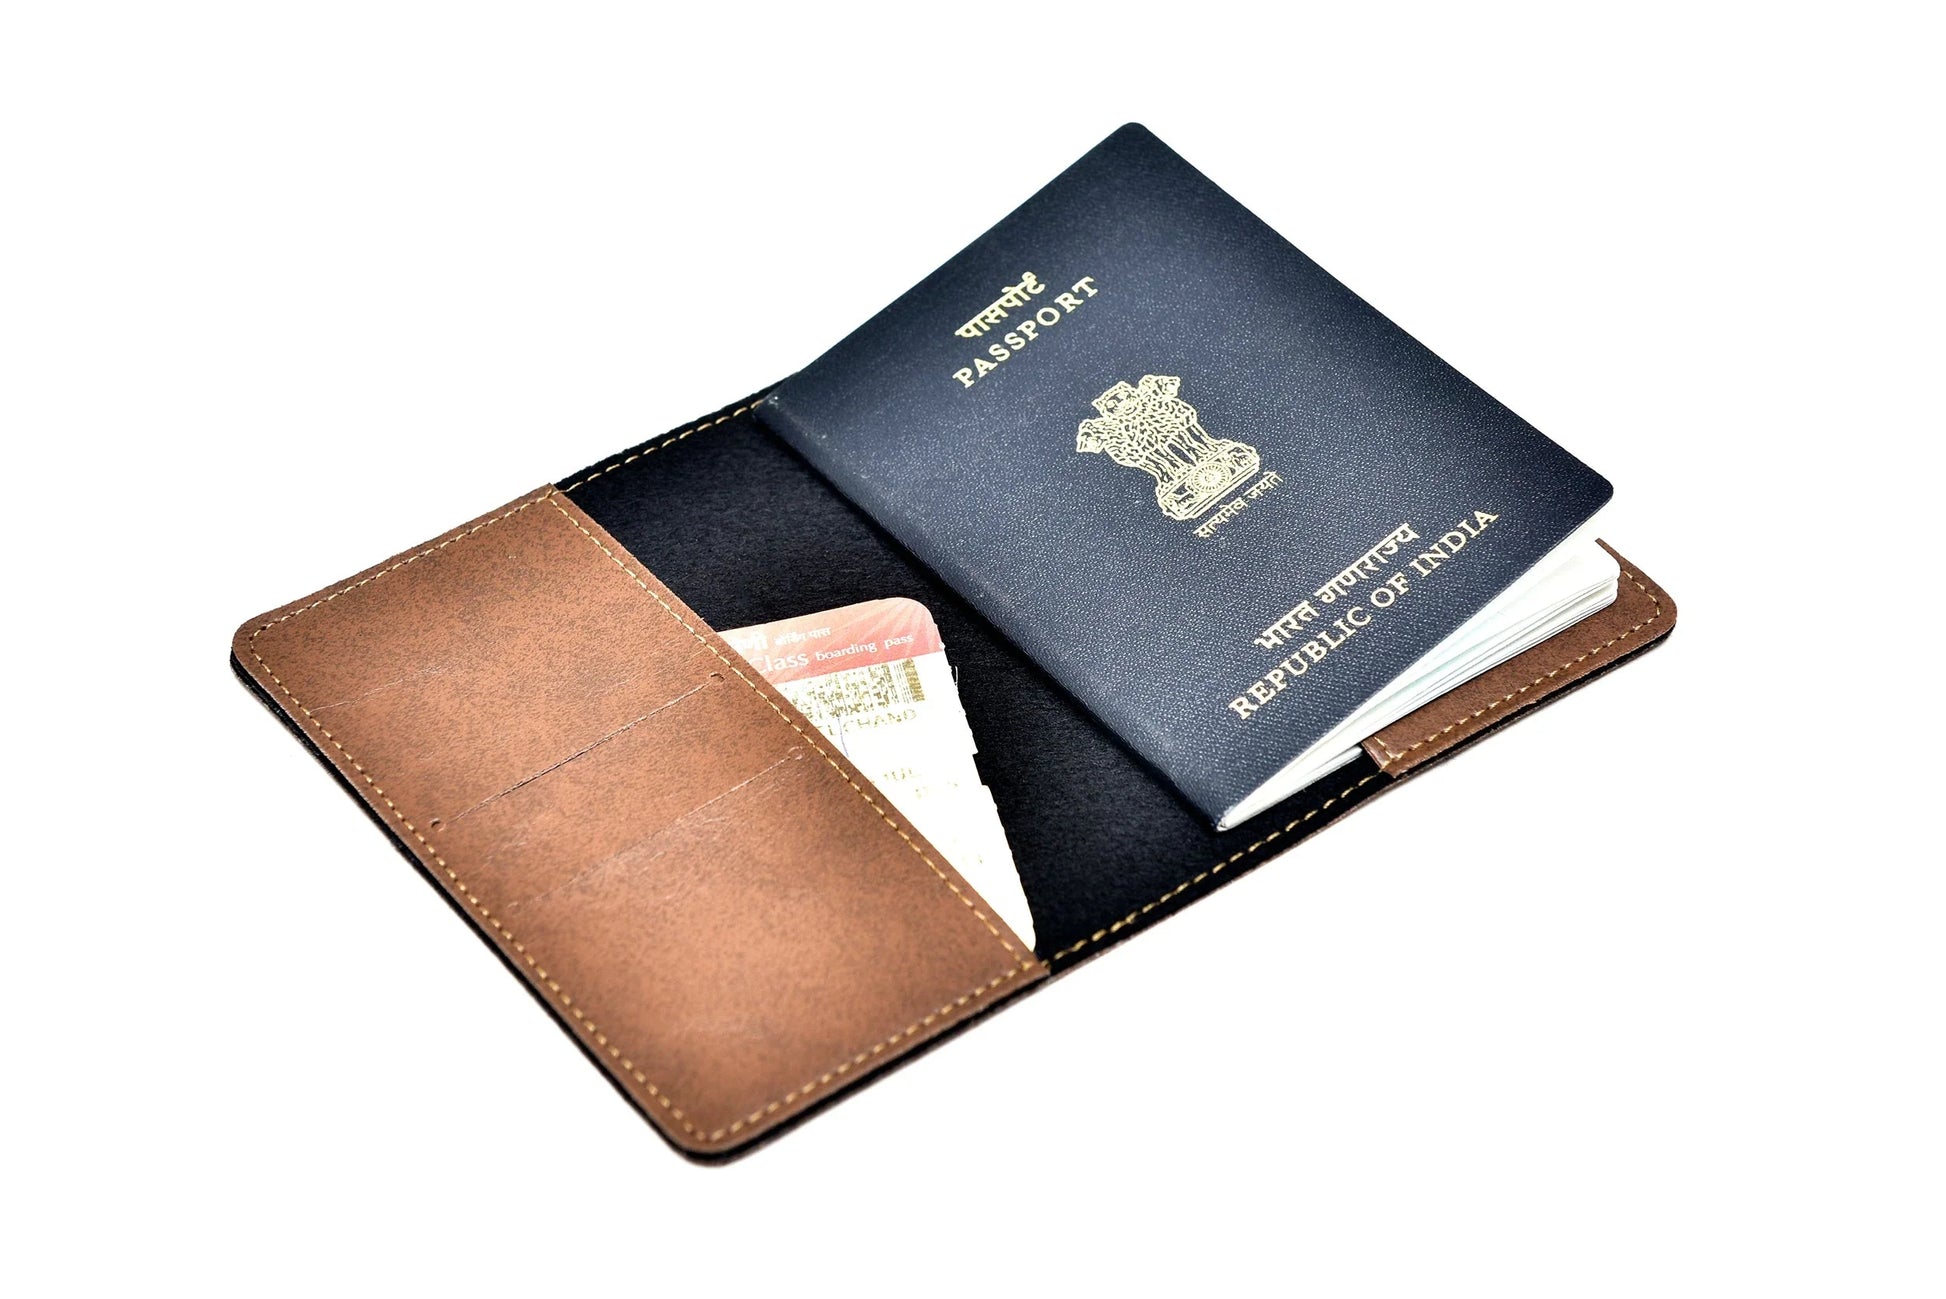 Inside or open view of tan passport case